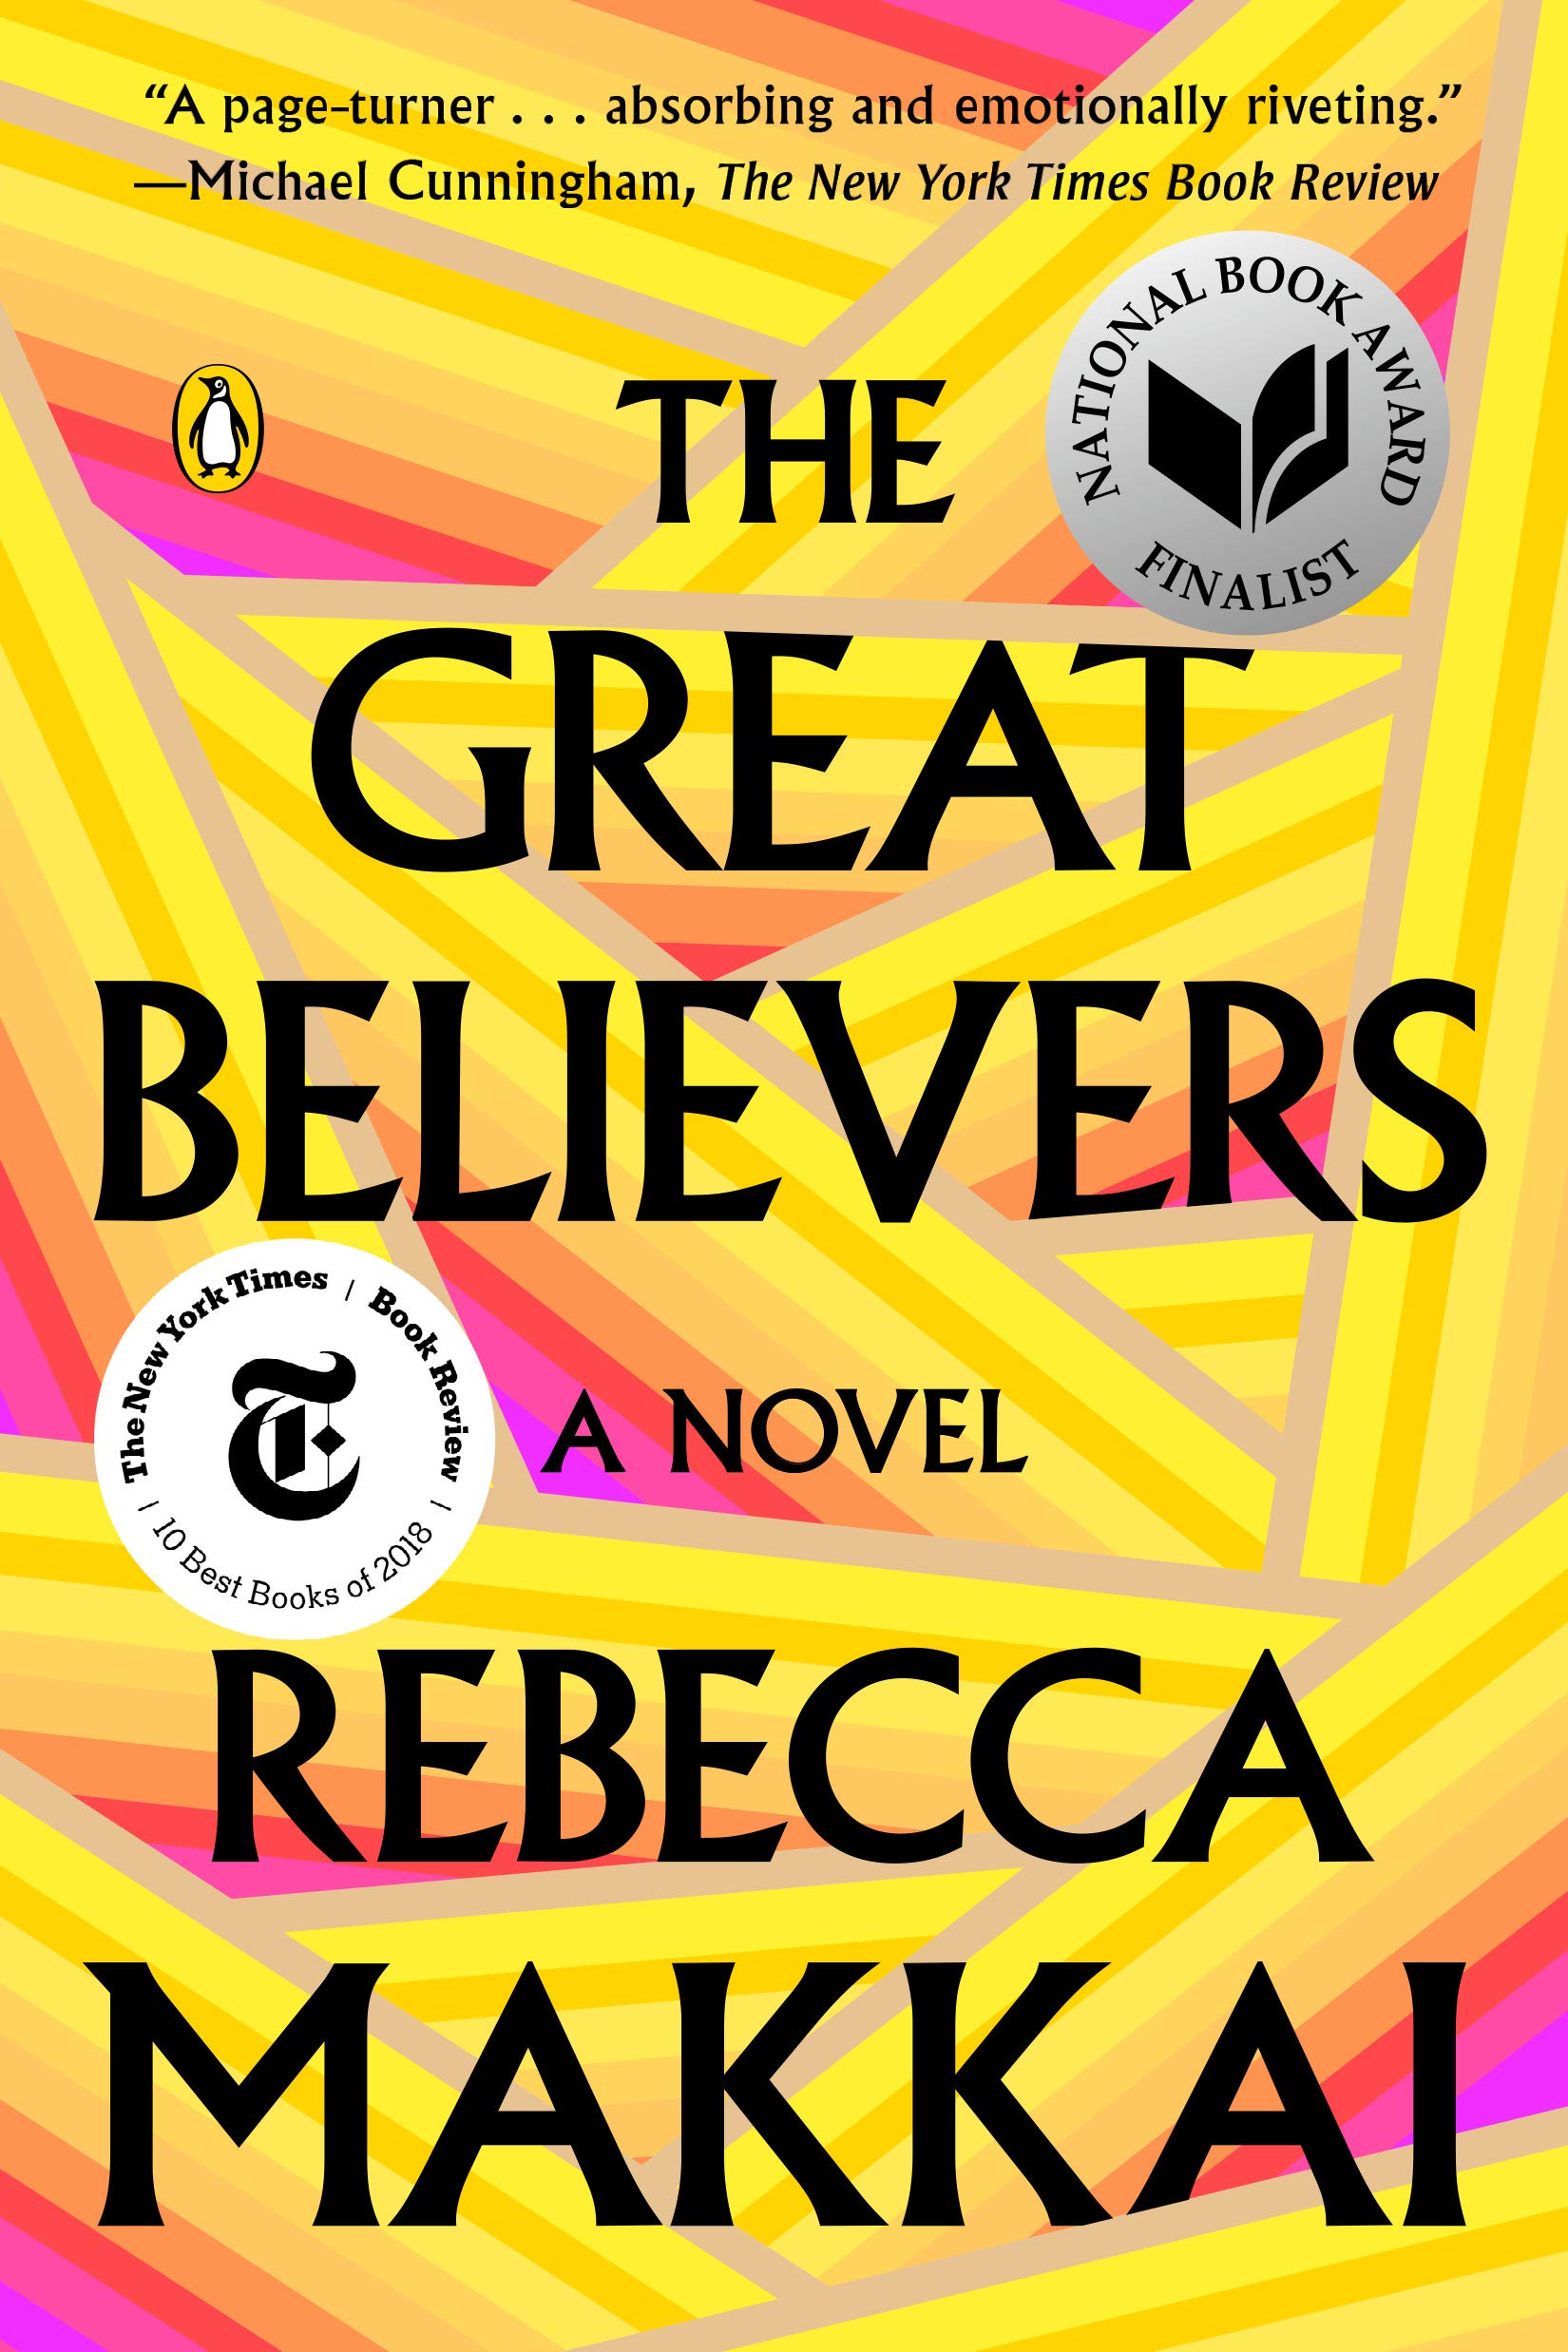 Book cover for "The Great Believers" by Rebecca Makkai